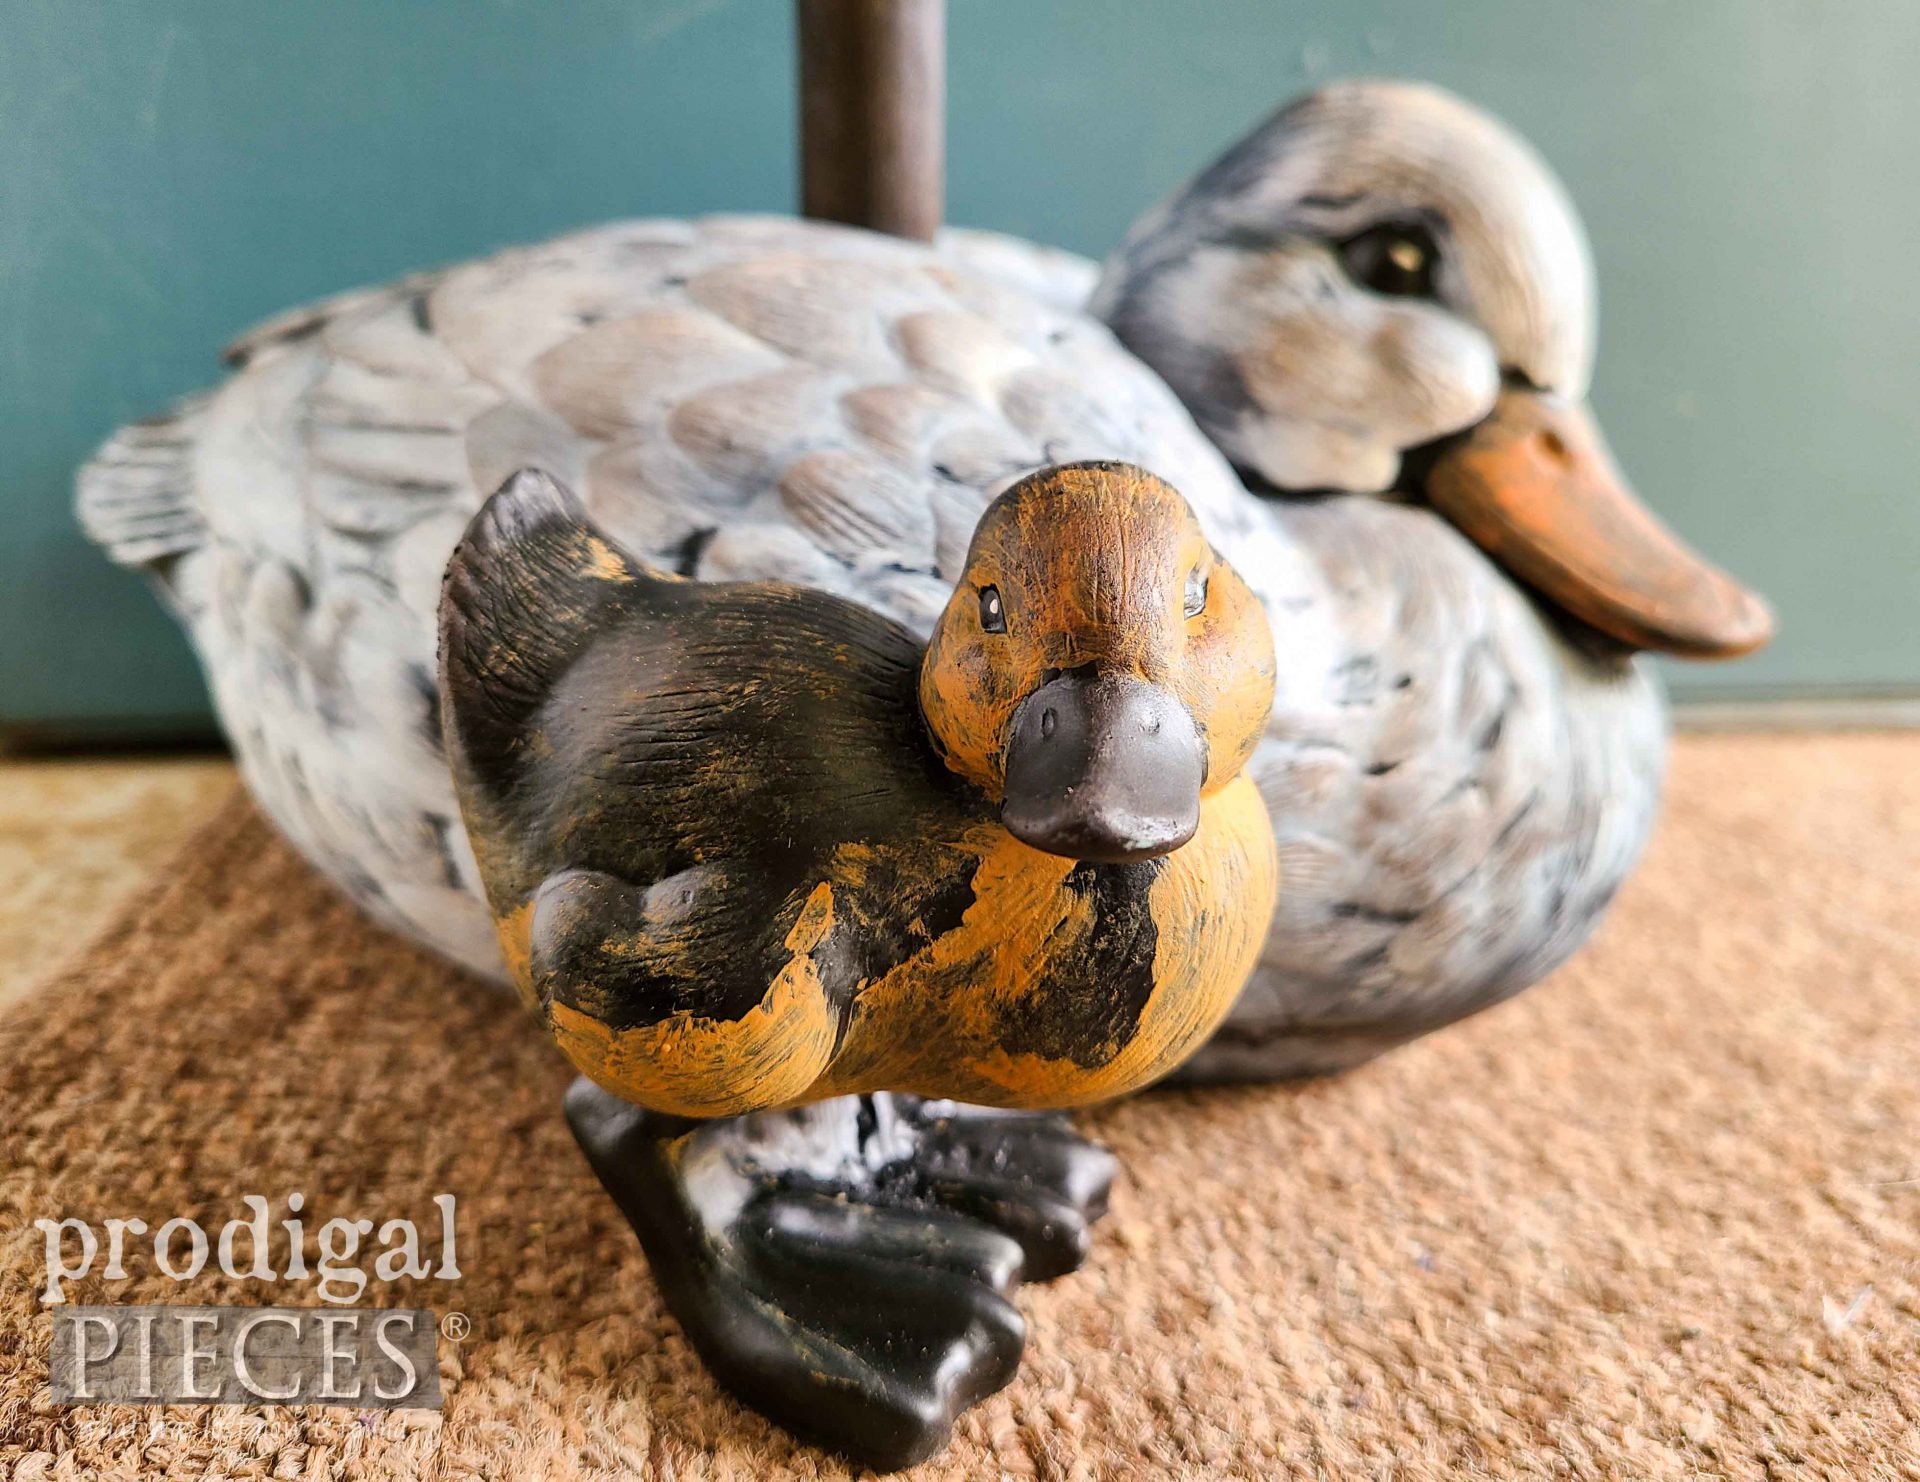 Mama Duck & Duckling Upcycled Doorstop by Larissa of Prodigal Pieces | prodigalpieces.com #prodigalpieces #diy #home #homedecor